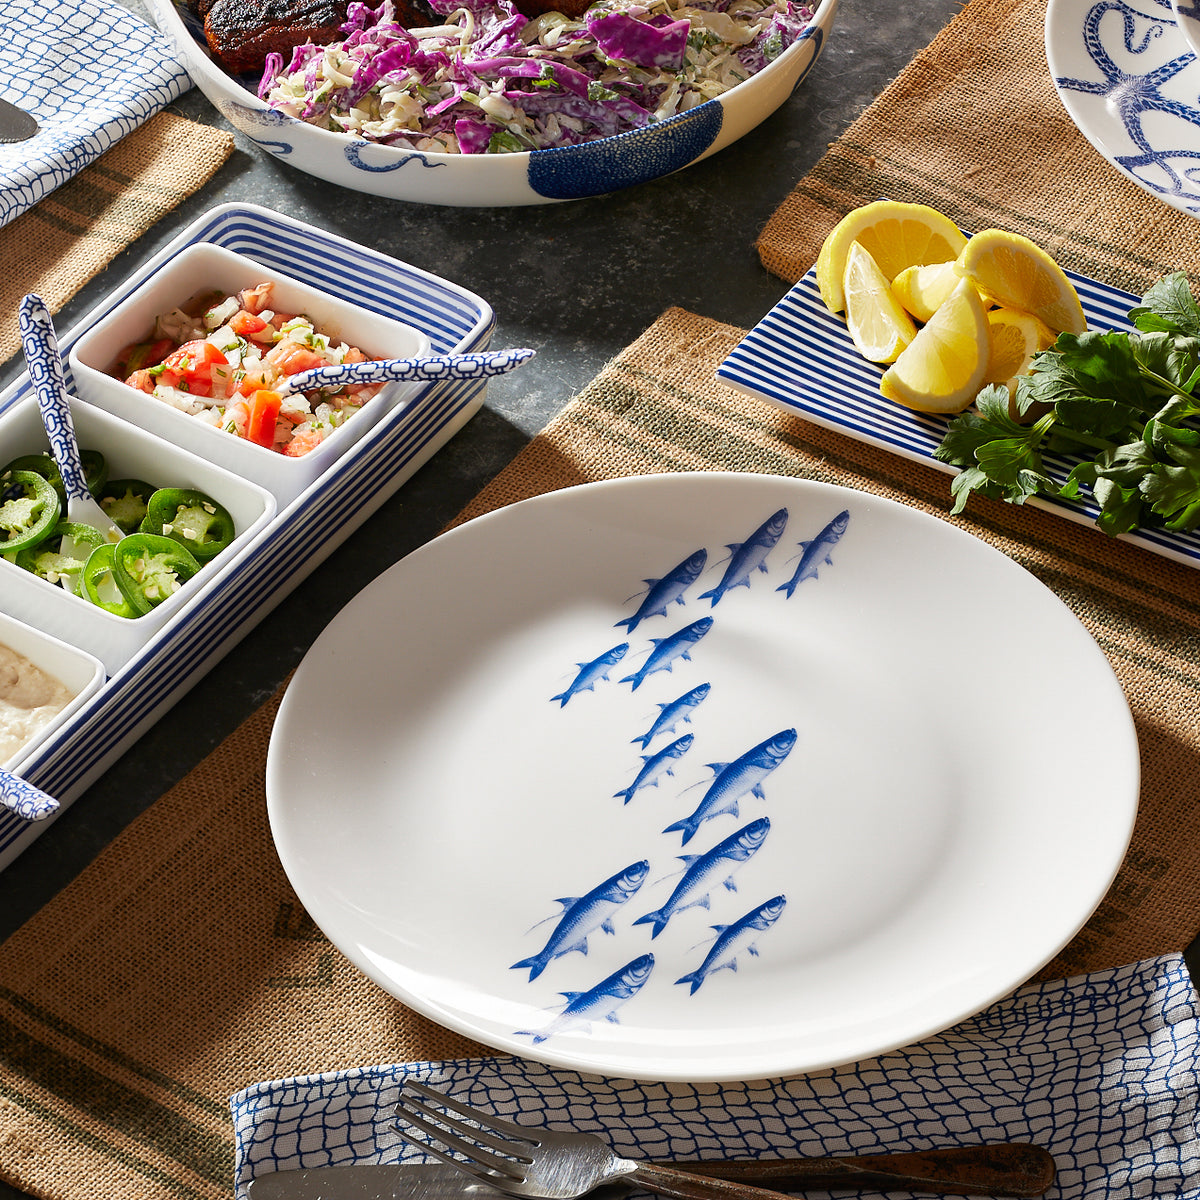 A School of Fish Coupe Dinner Plate with a blue fish pattern, surrounded by colorful dinnerware and sliced lemons, arranged on a textured tabletop from Caskata Artisanal Home.